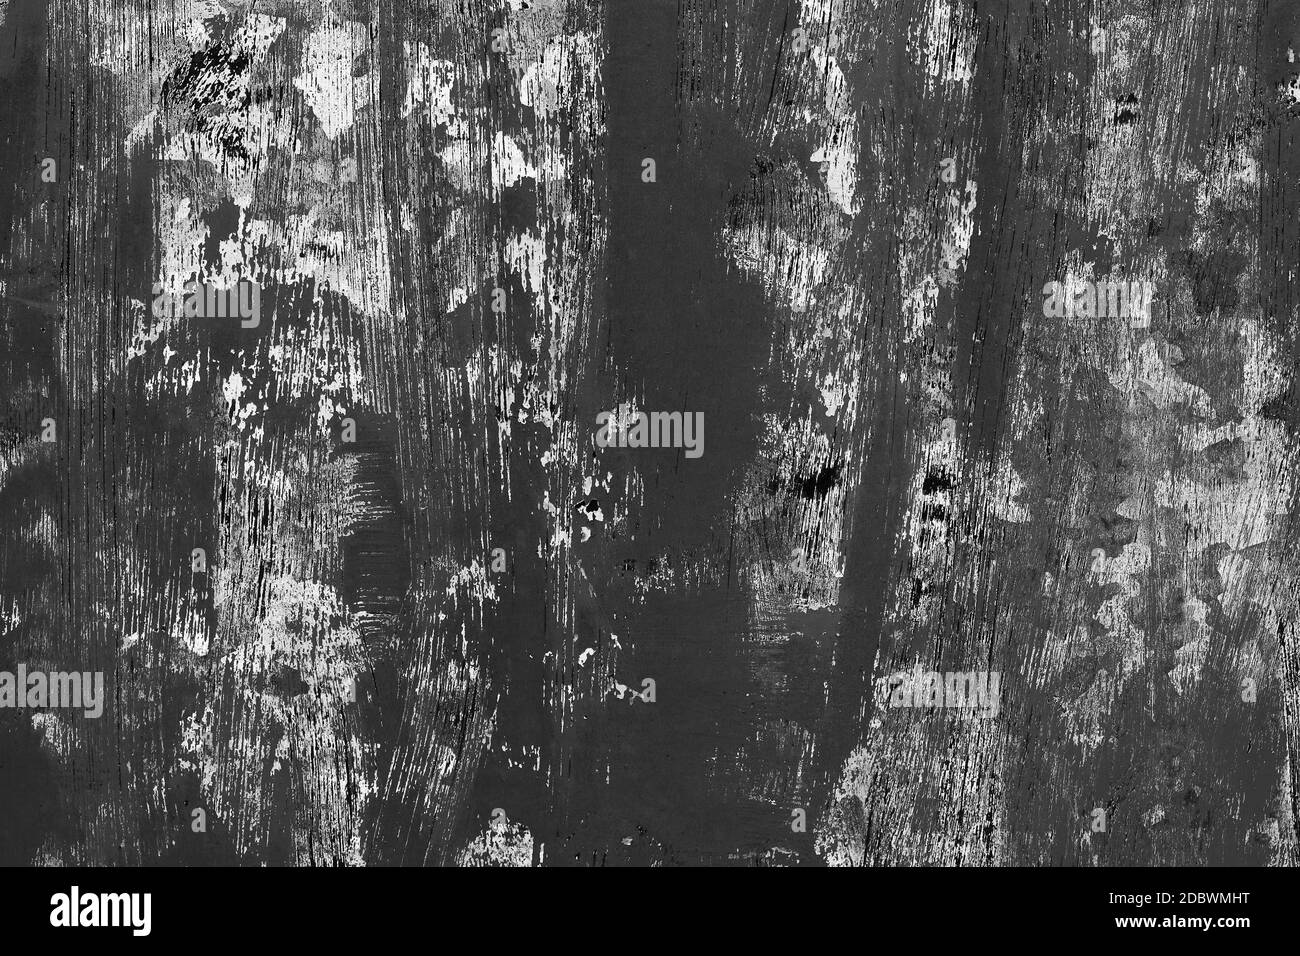 Scratched rusty metal surface in black and grey Stock Photo